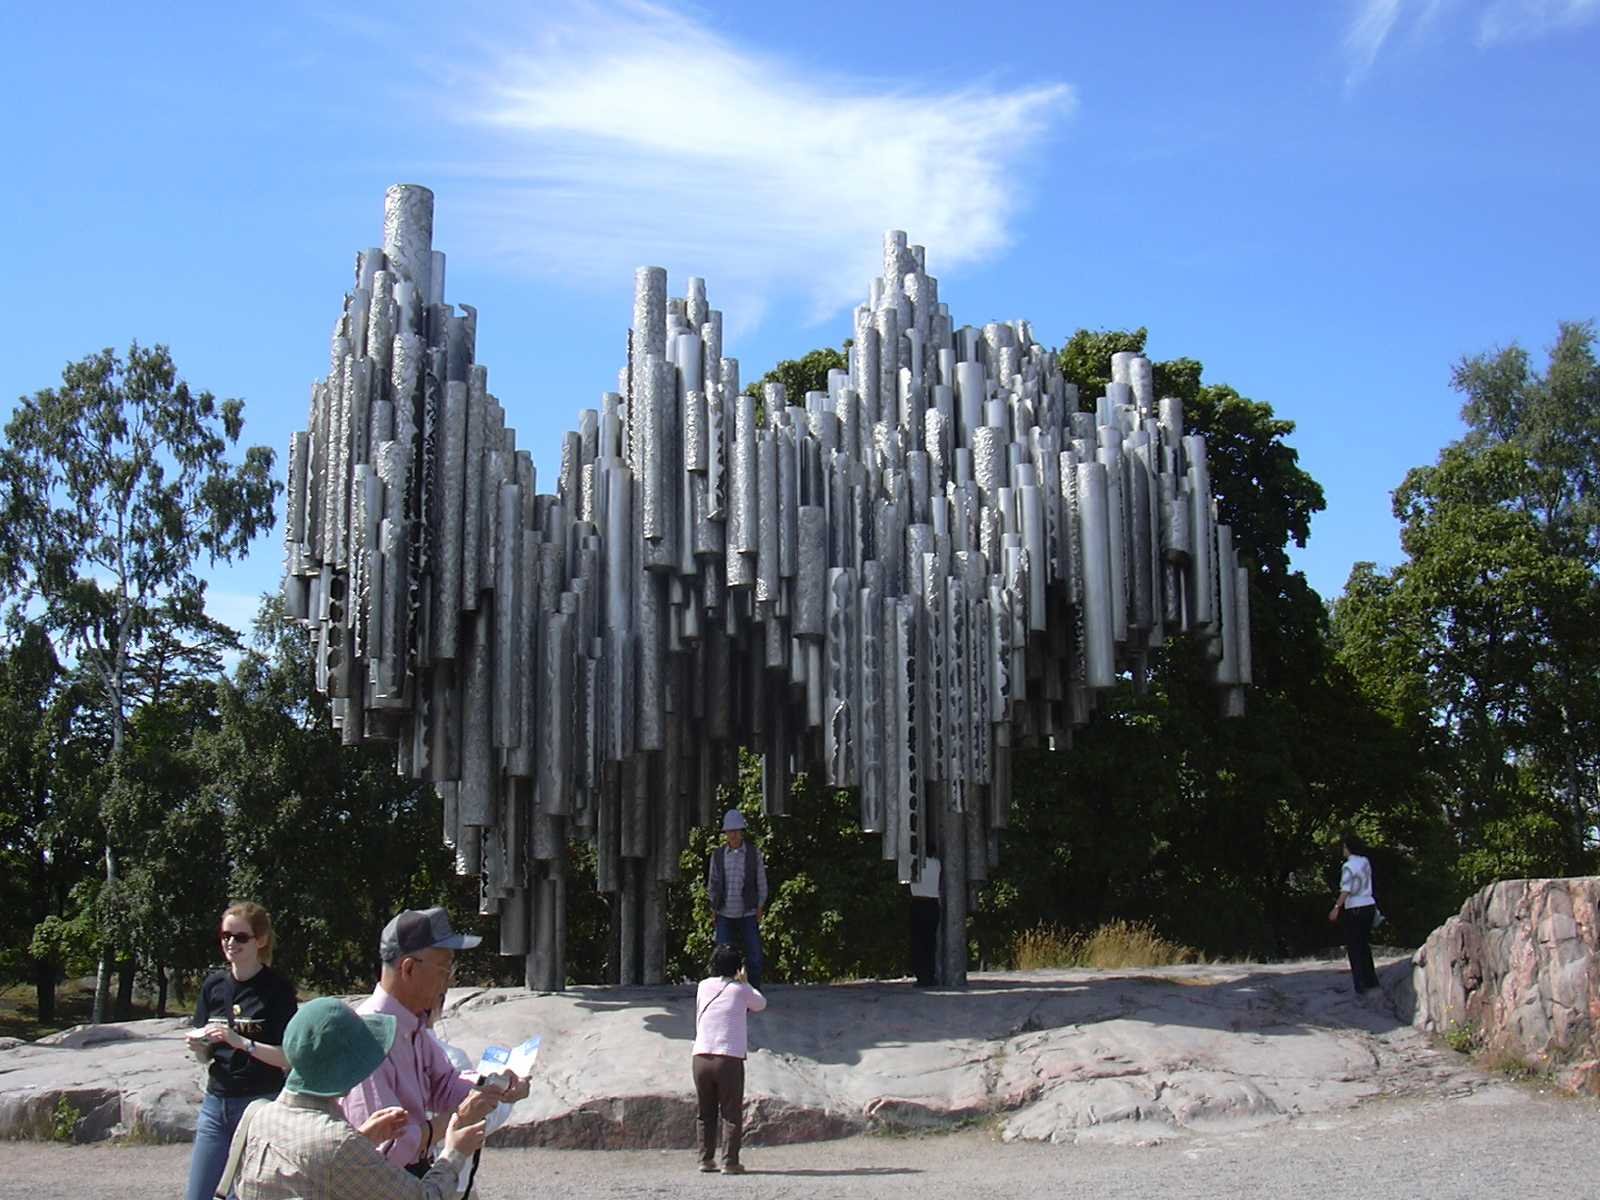 Beautiful Picture Of The Sibelius Monument In Helsinki, Finland